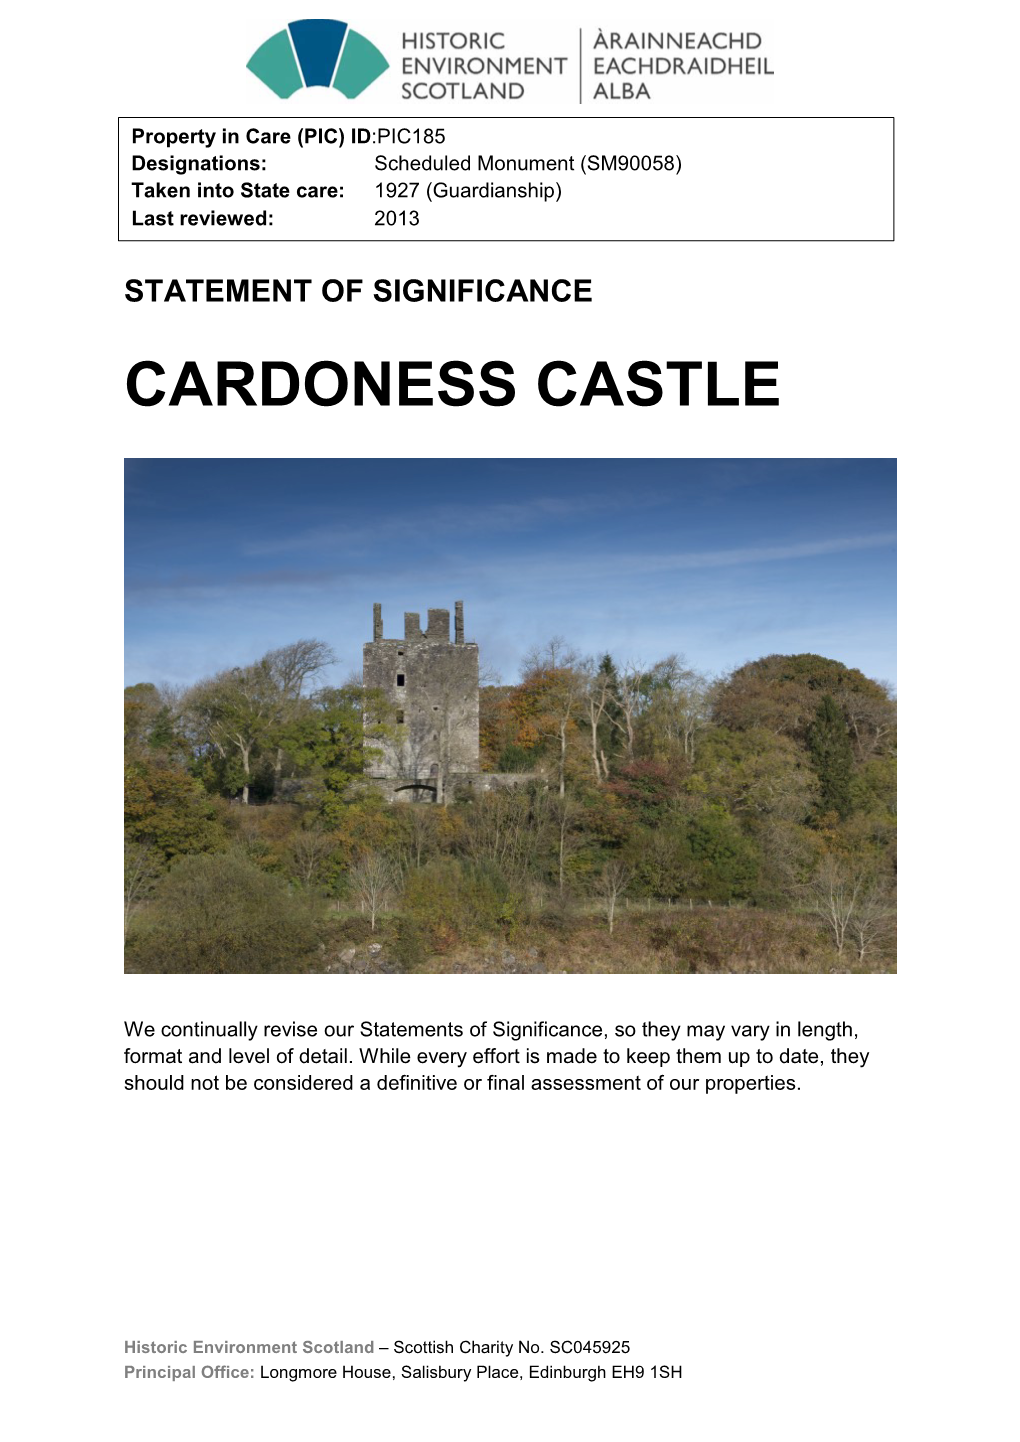 Cardoness Castle Statement of Significance